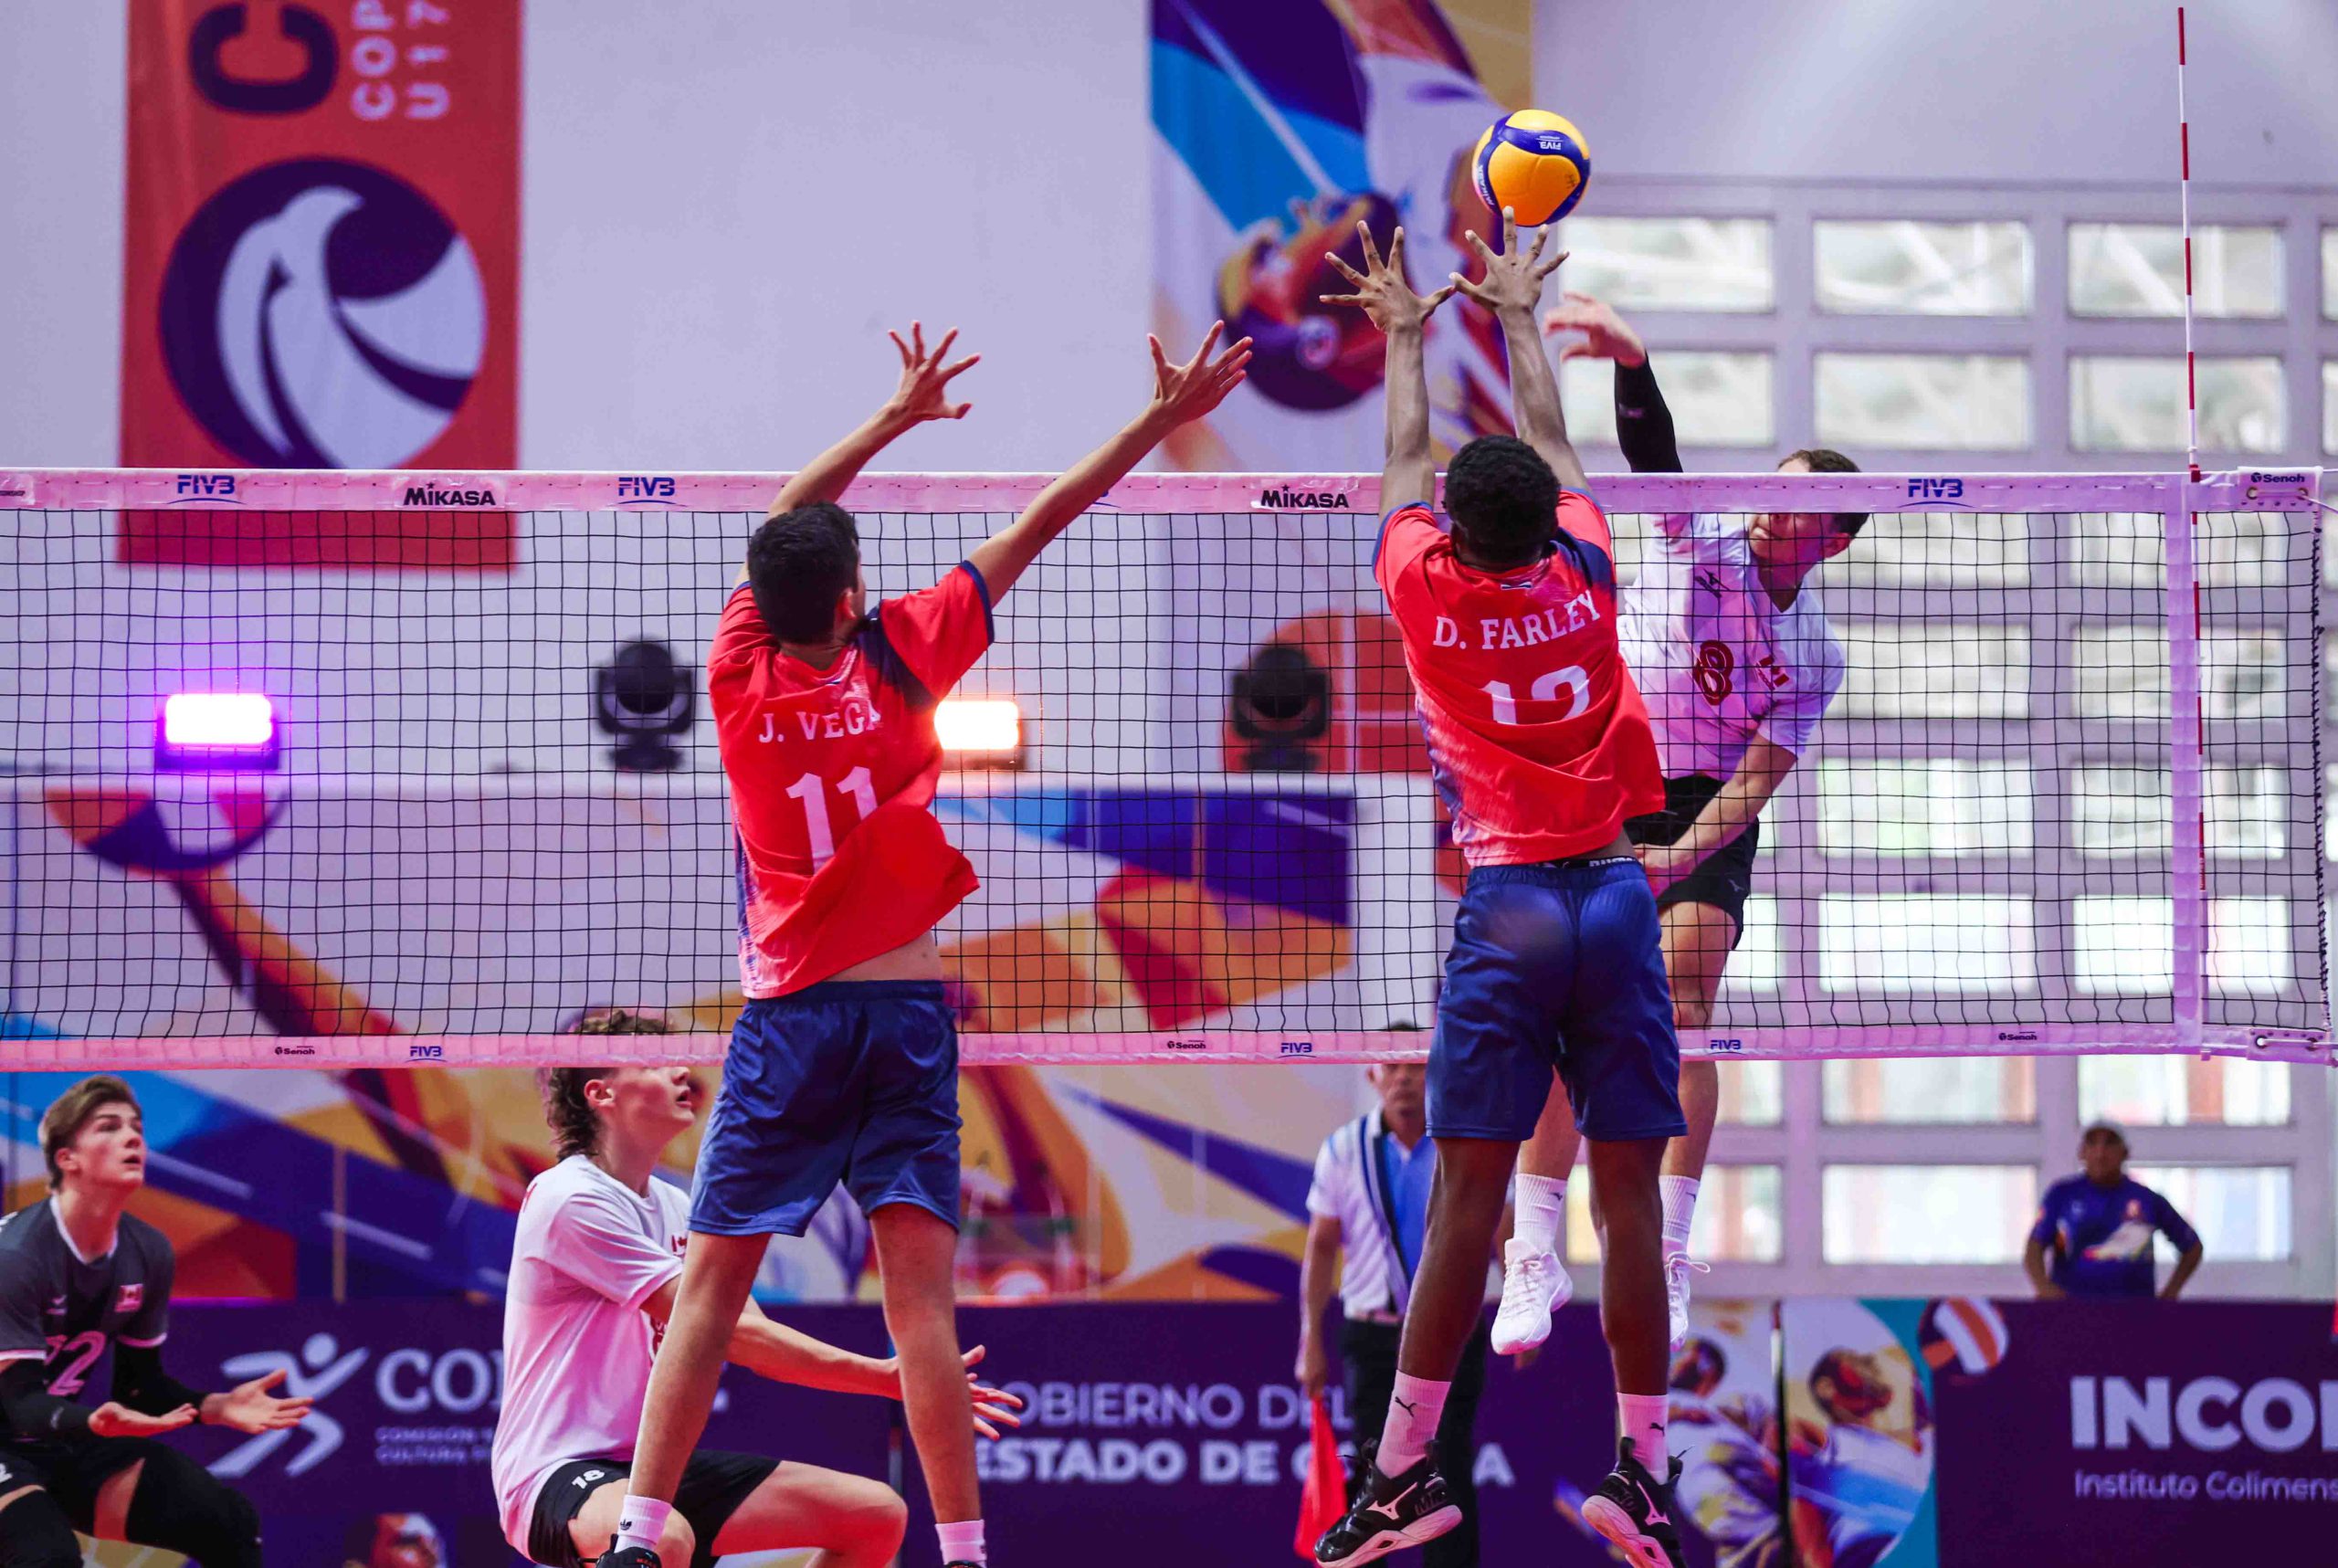 Canada Opens U17 Pan Am Cup With Five-Set Win Over Costa Rica